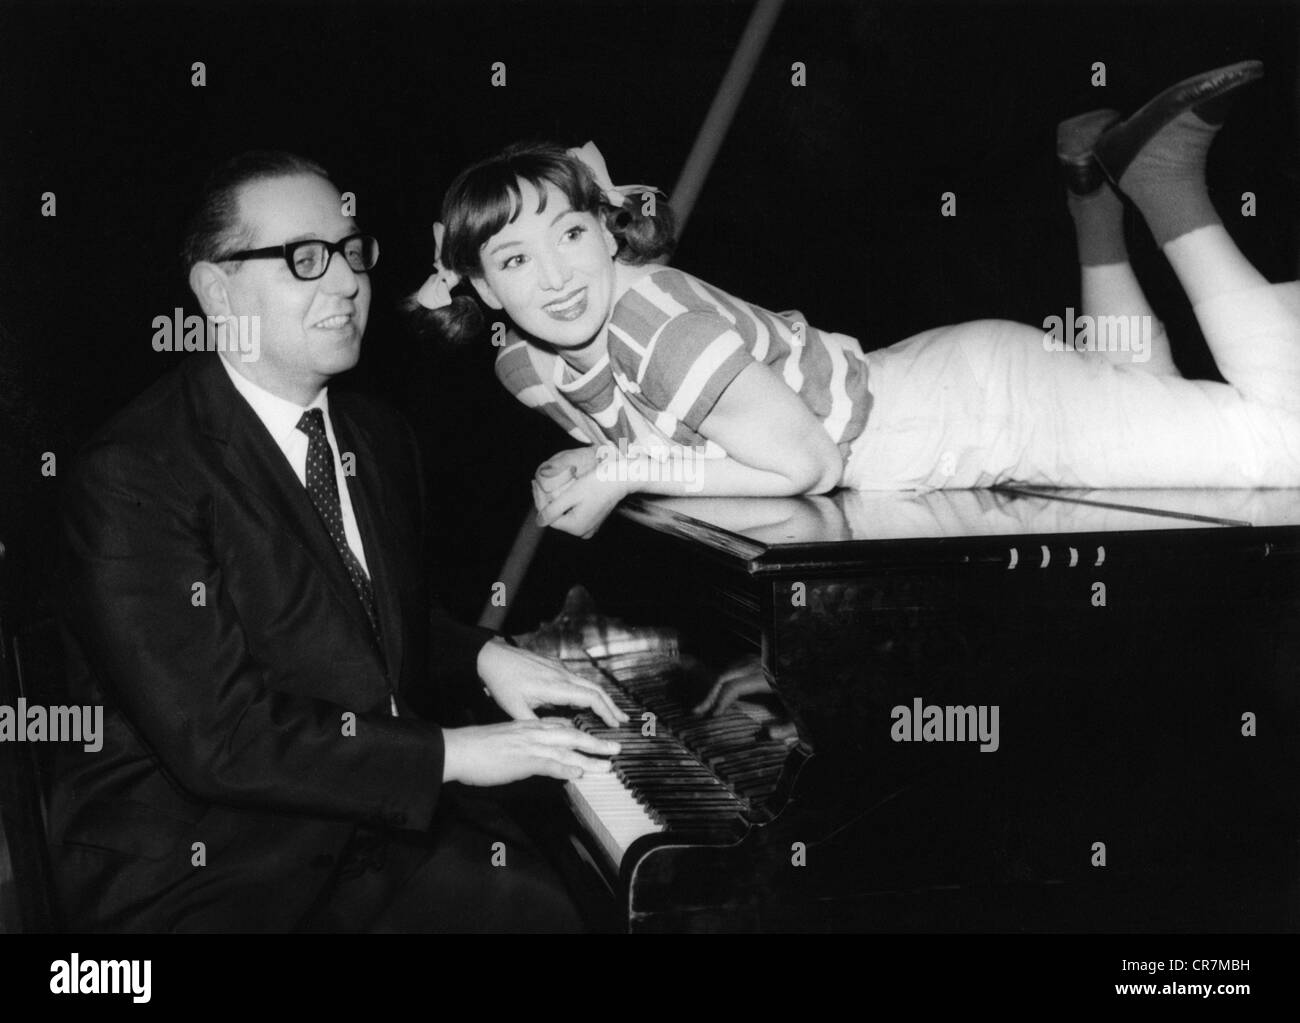 Kreisler, Georg, 18.7.1922 - 22.11.2011, Austrian-American cabarettist, with wife Topsy Kueppers during a performance, 1960s, Stock Photo